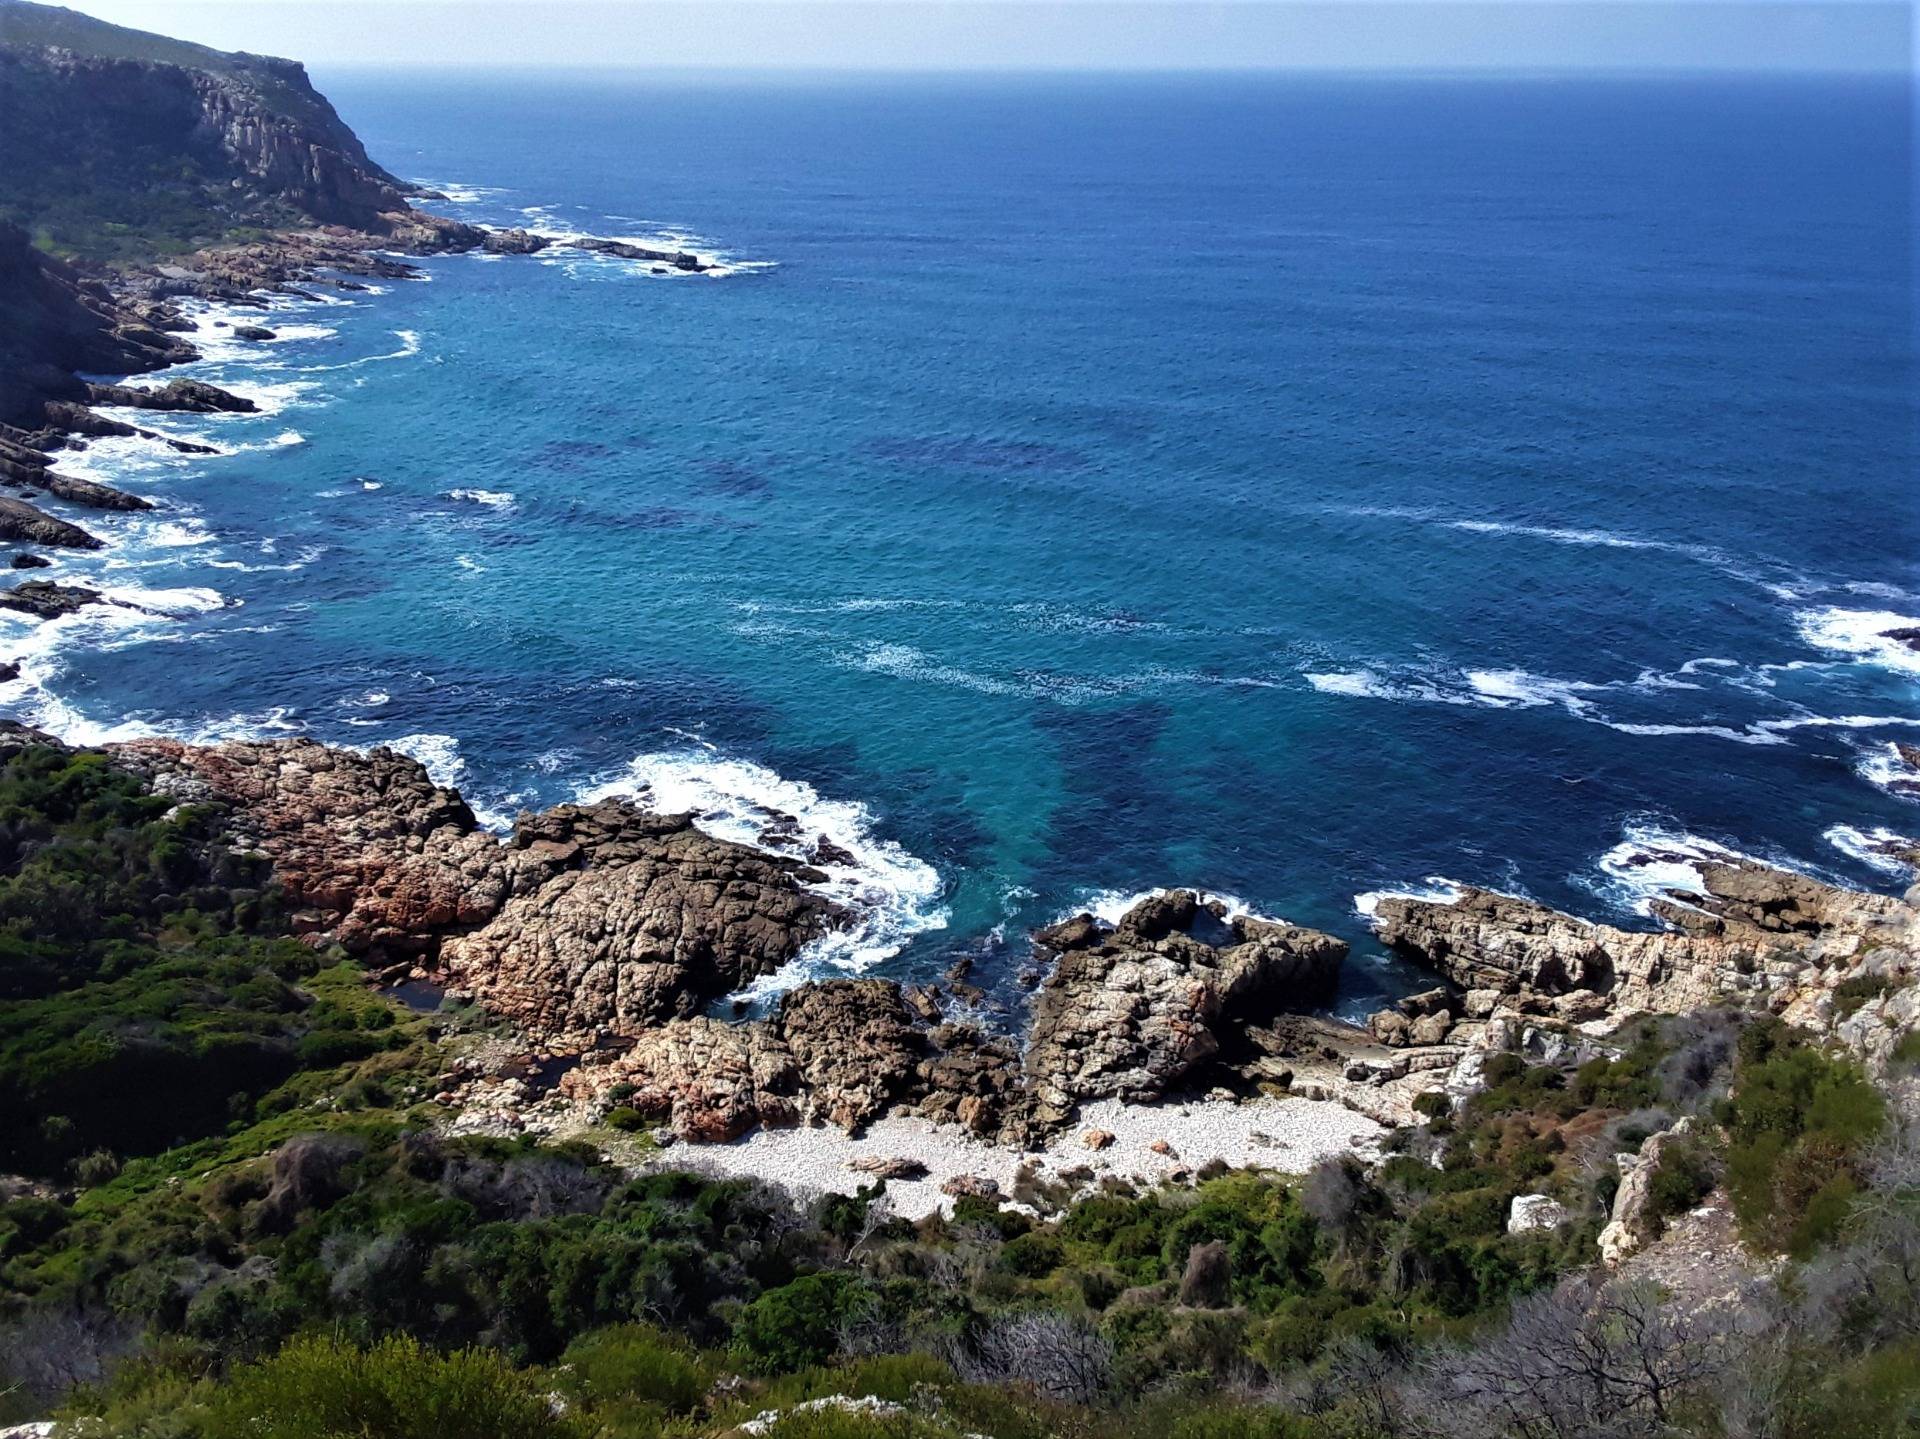 The rugged rocky shoreline of the ”Garden Route” Plettenberg Bay in South Africa